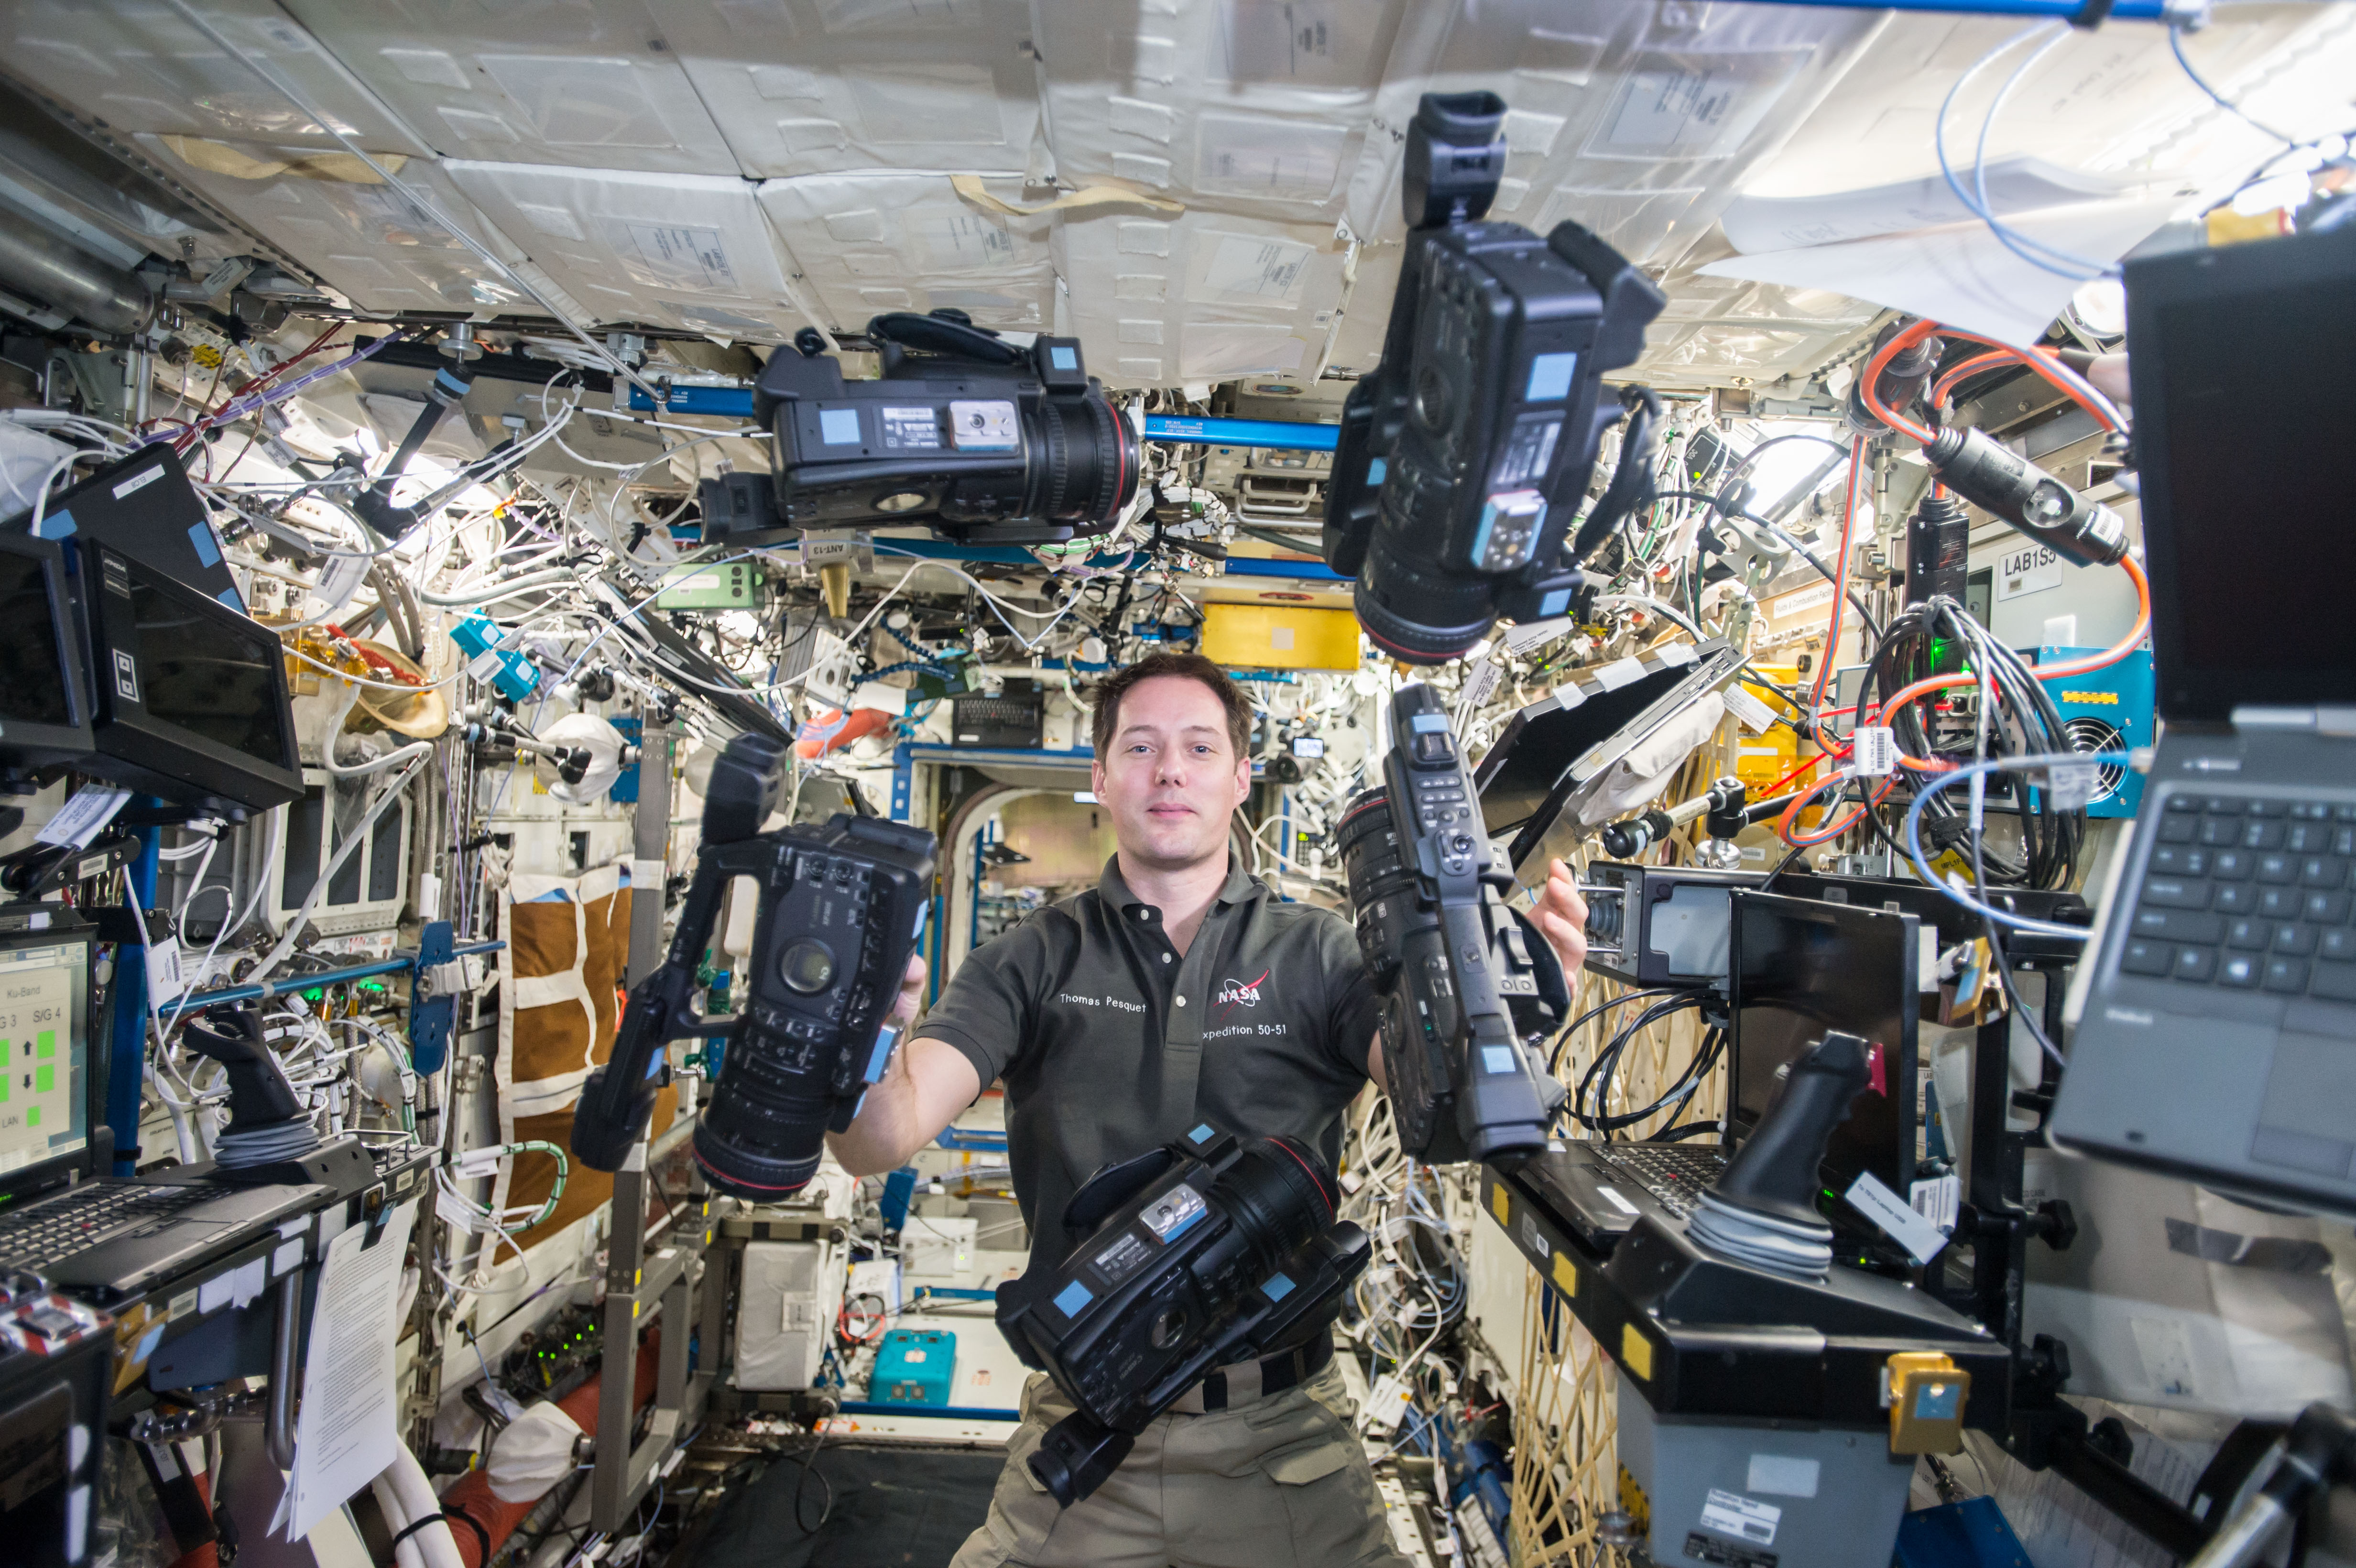 ISS-50 Thomas Pesquet with video cameras in the Destiny lab